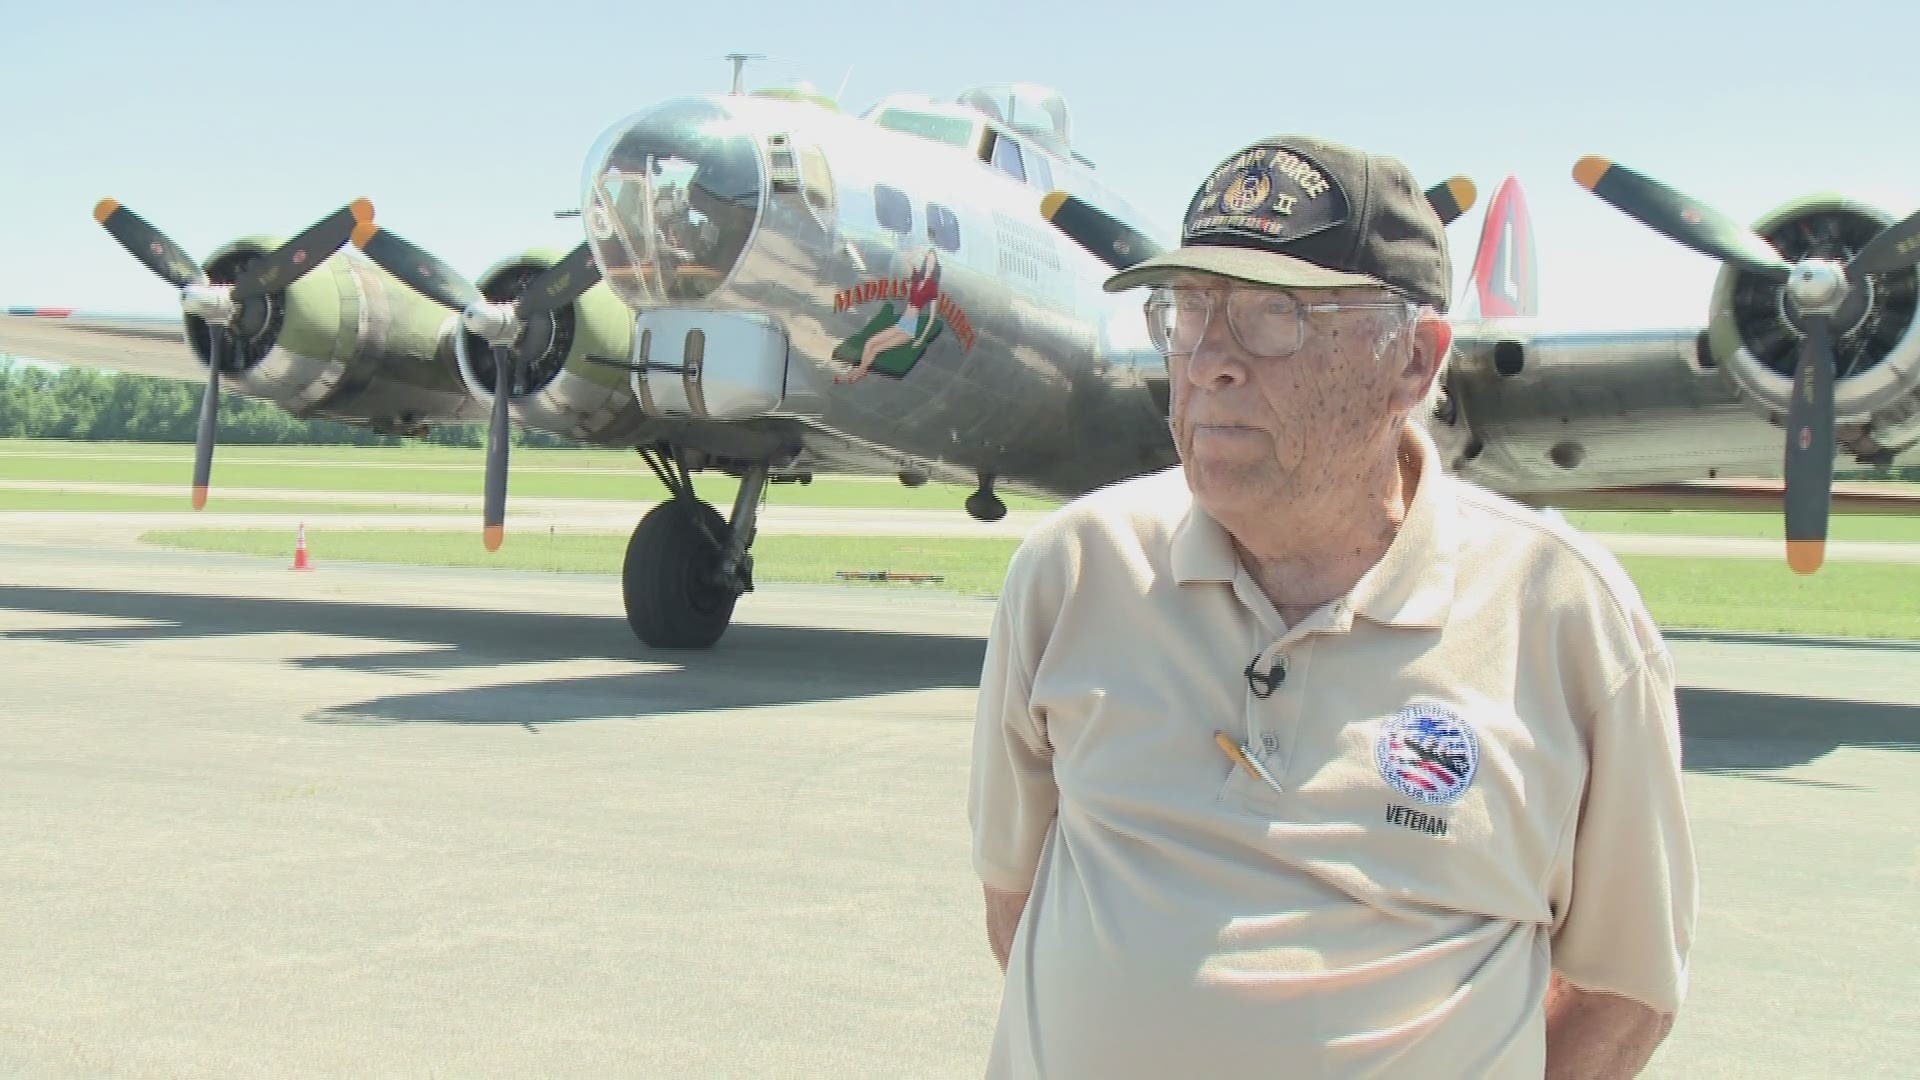 Full interview with WWII B-17 veteran Lee Hutchinson